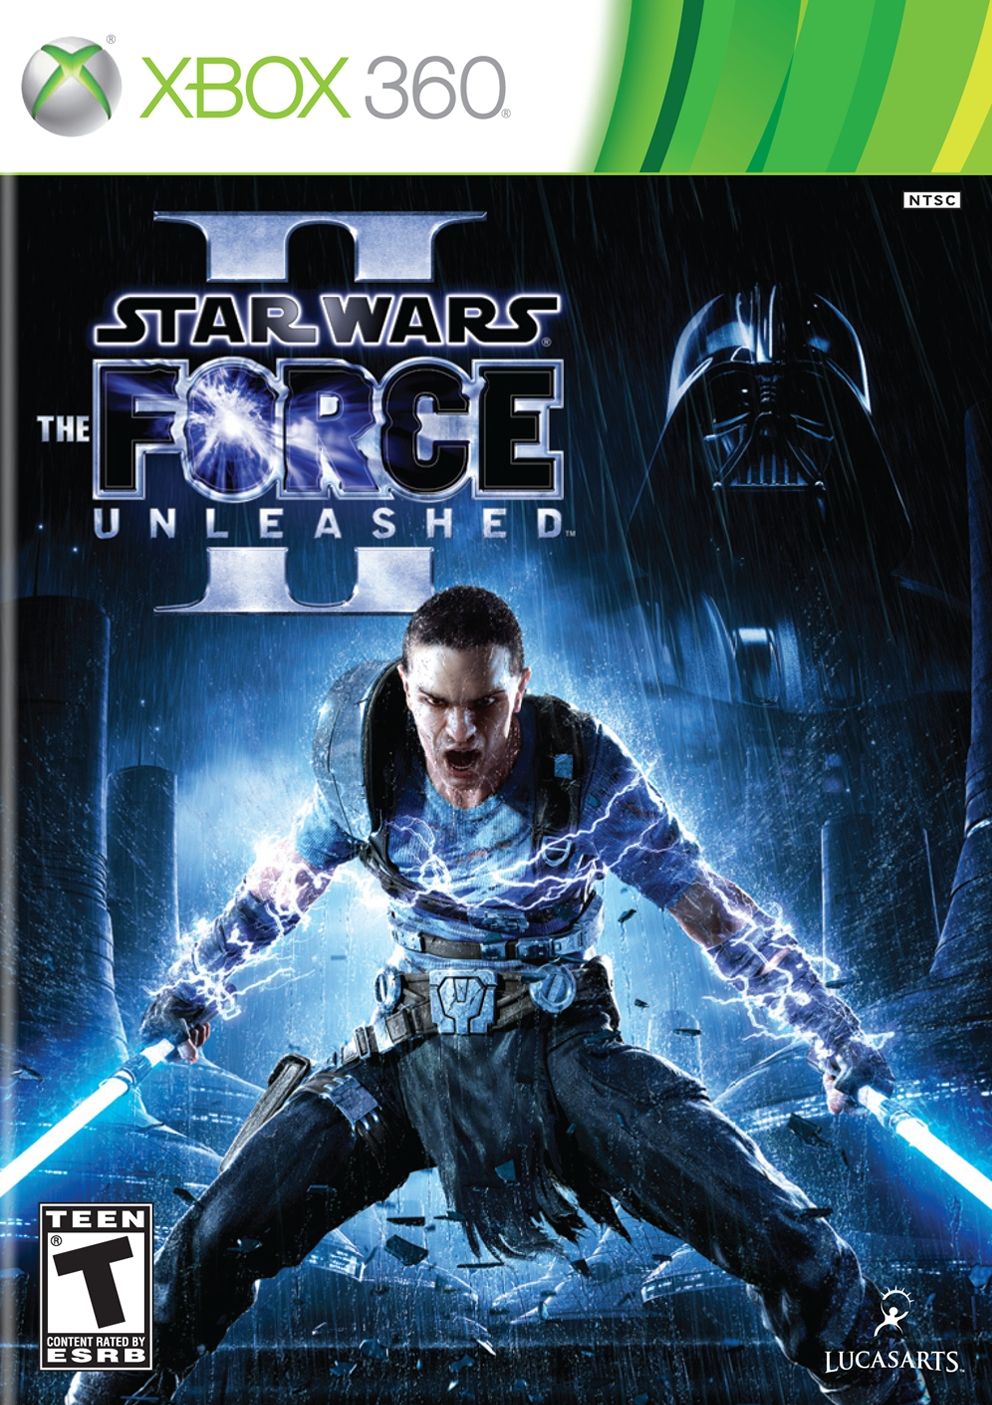 Force Unleashed 2 Screenshots, Pictures, Wallpapers - Xbox 360 - IGN